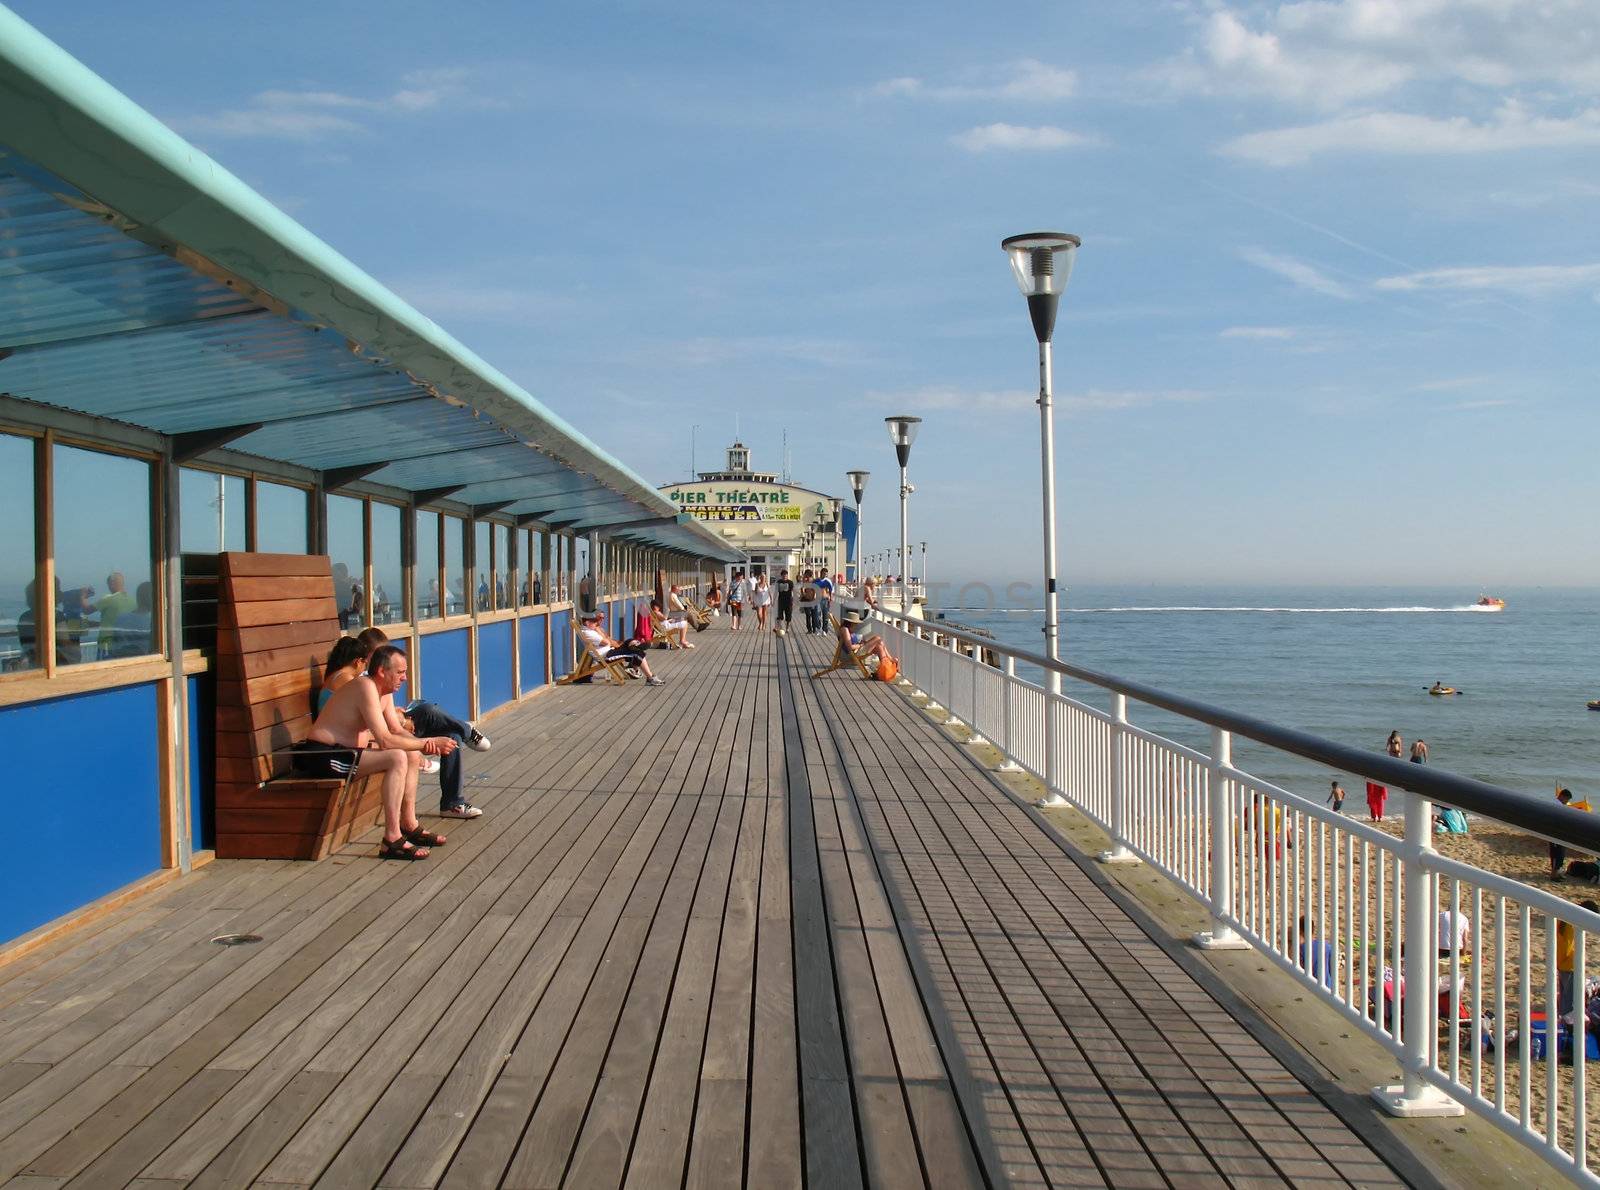 Bournemouth Pier, Dorset, Britain. Looking out to sea and the Pier Theatre.